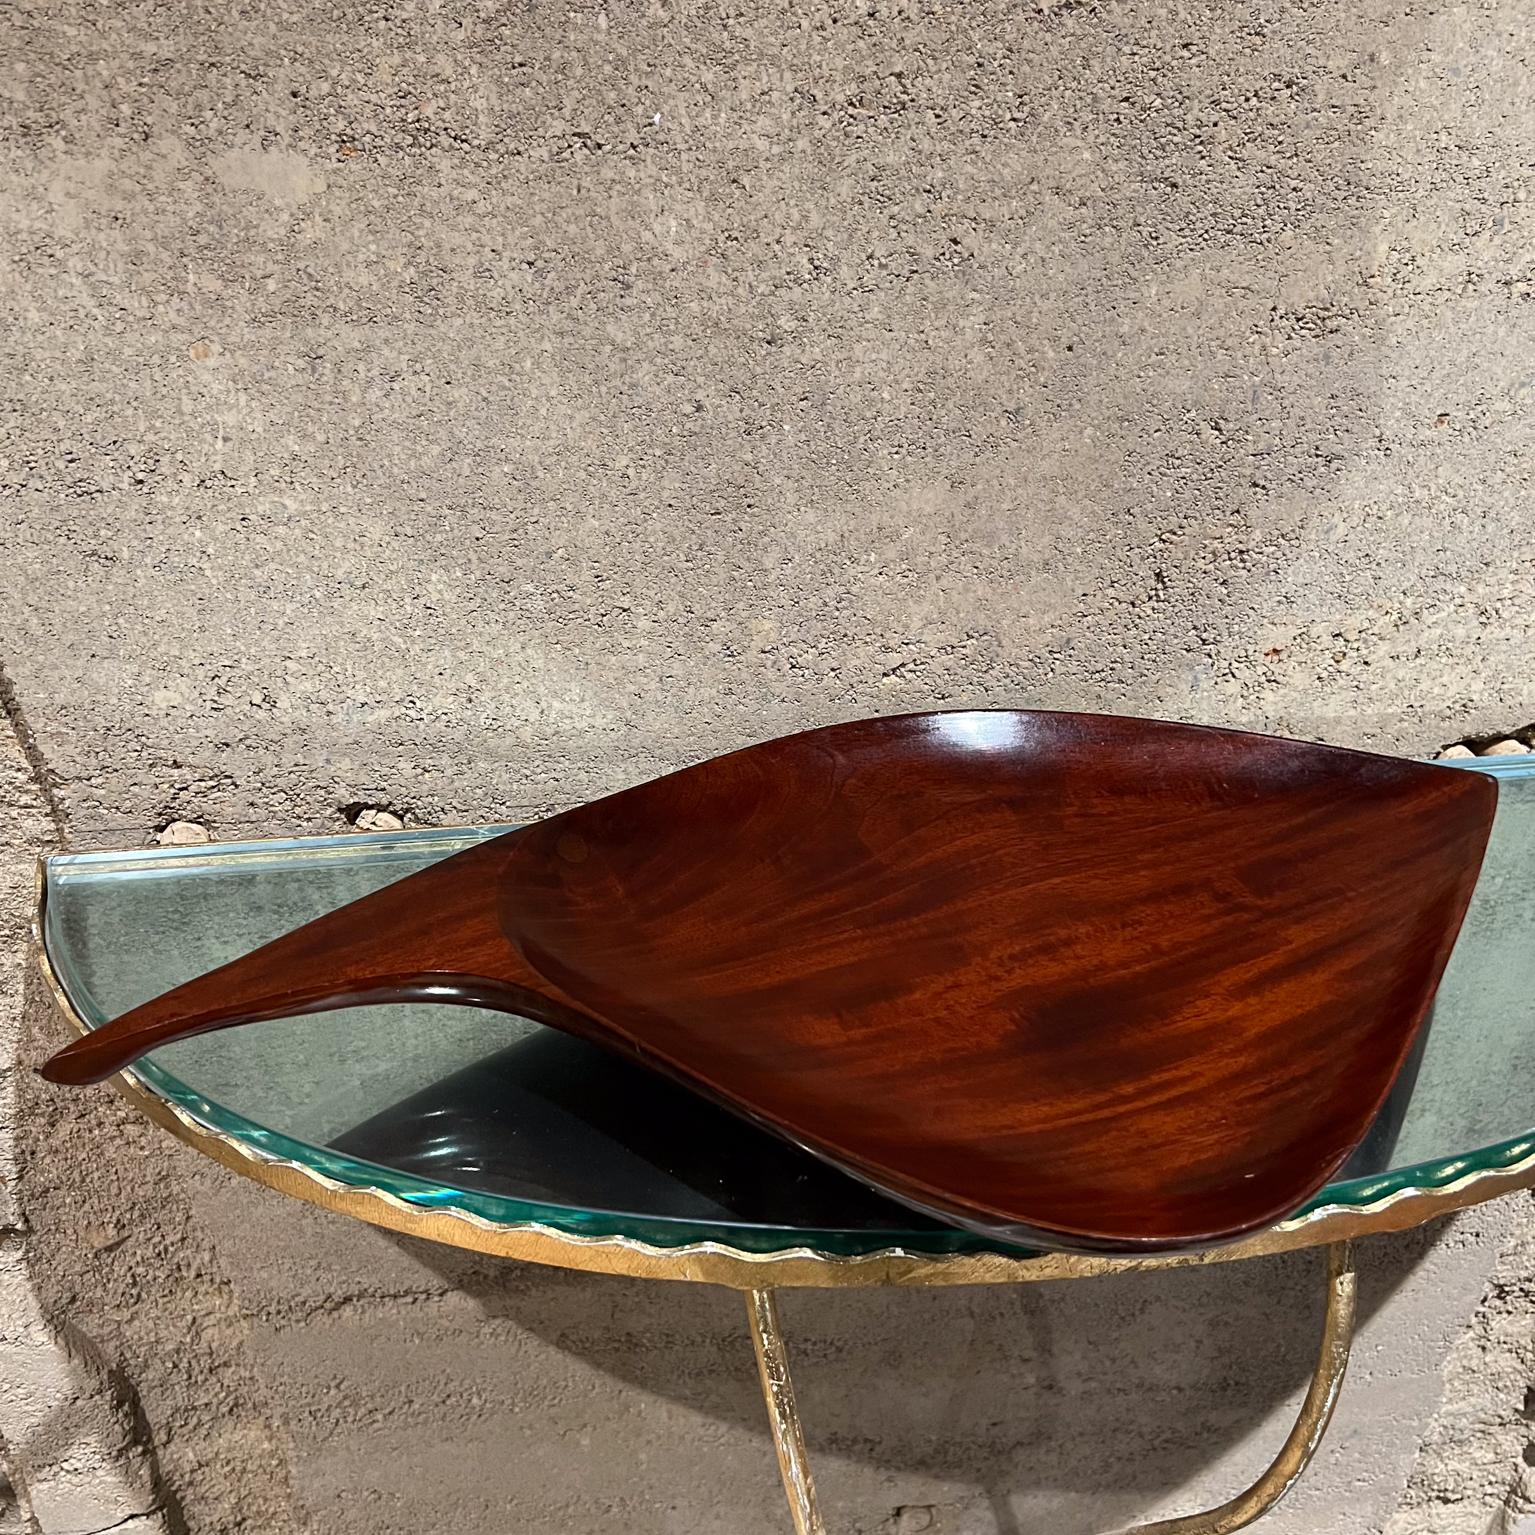 1960s Caribbean Modernism Sculptural Wood Bowl Catch All
 21 x 11.25 d x 1.5h
Stamped Caribbean Hand Craft
Preowned original vintage condition.
See images please.

